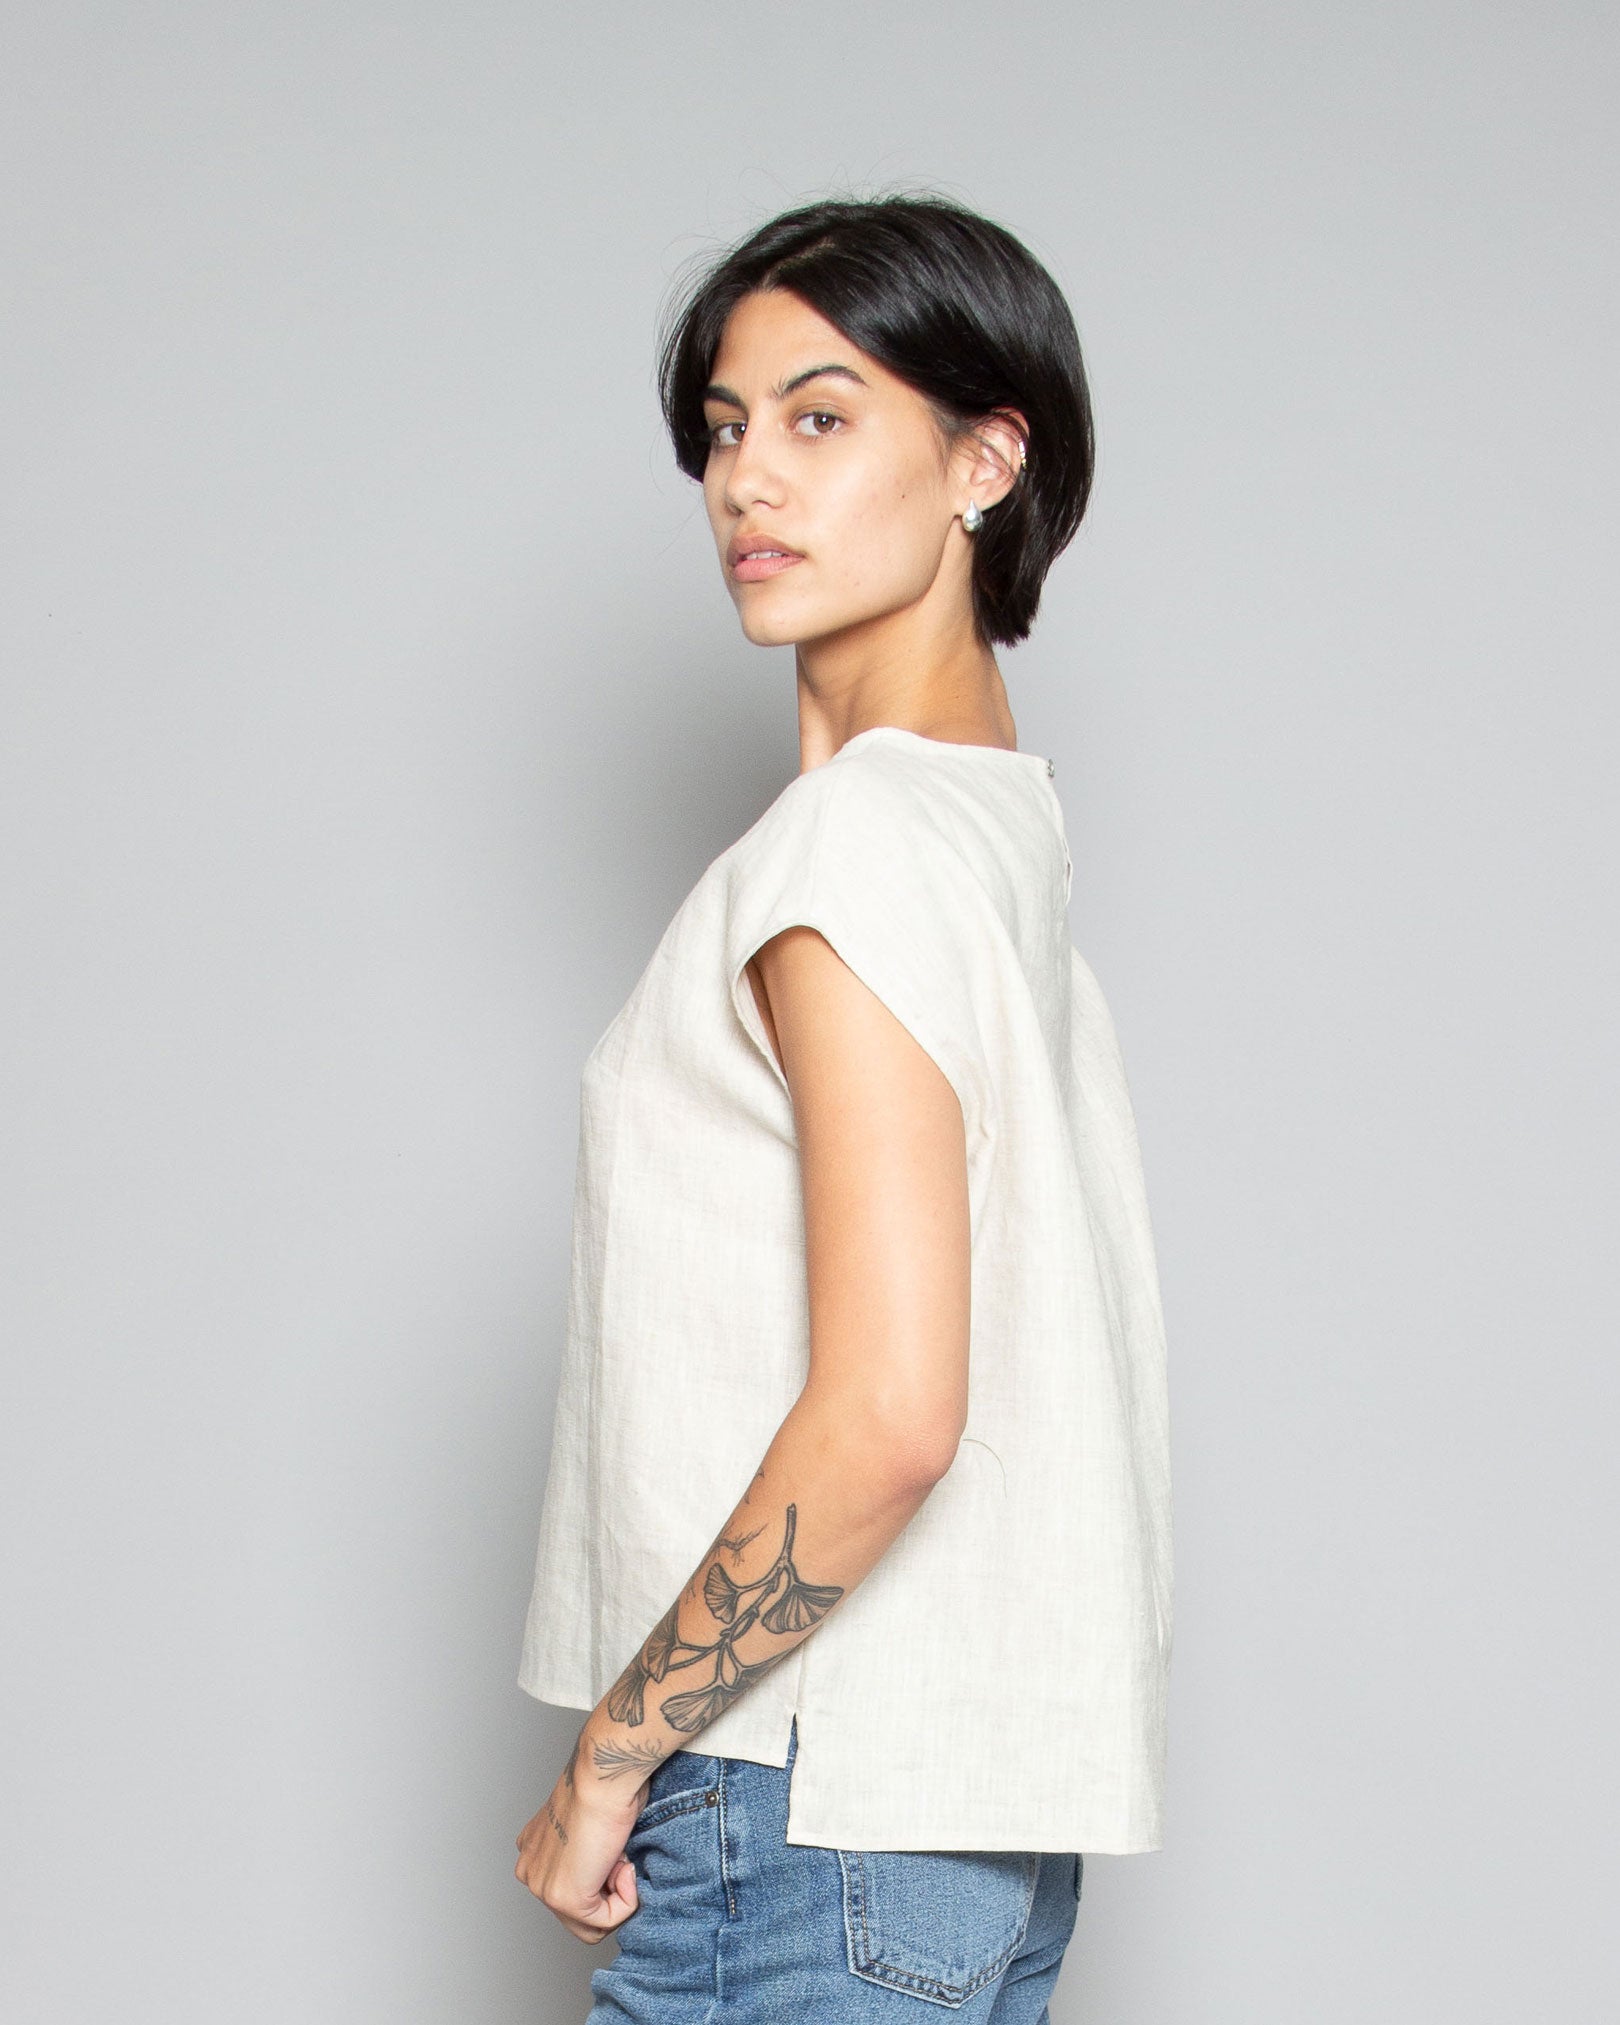 PERSONS Penelope Shell Tank in Greige available at Lahn.shop